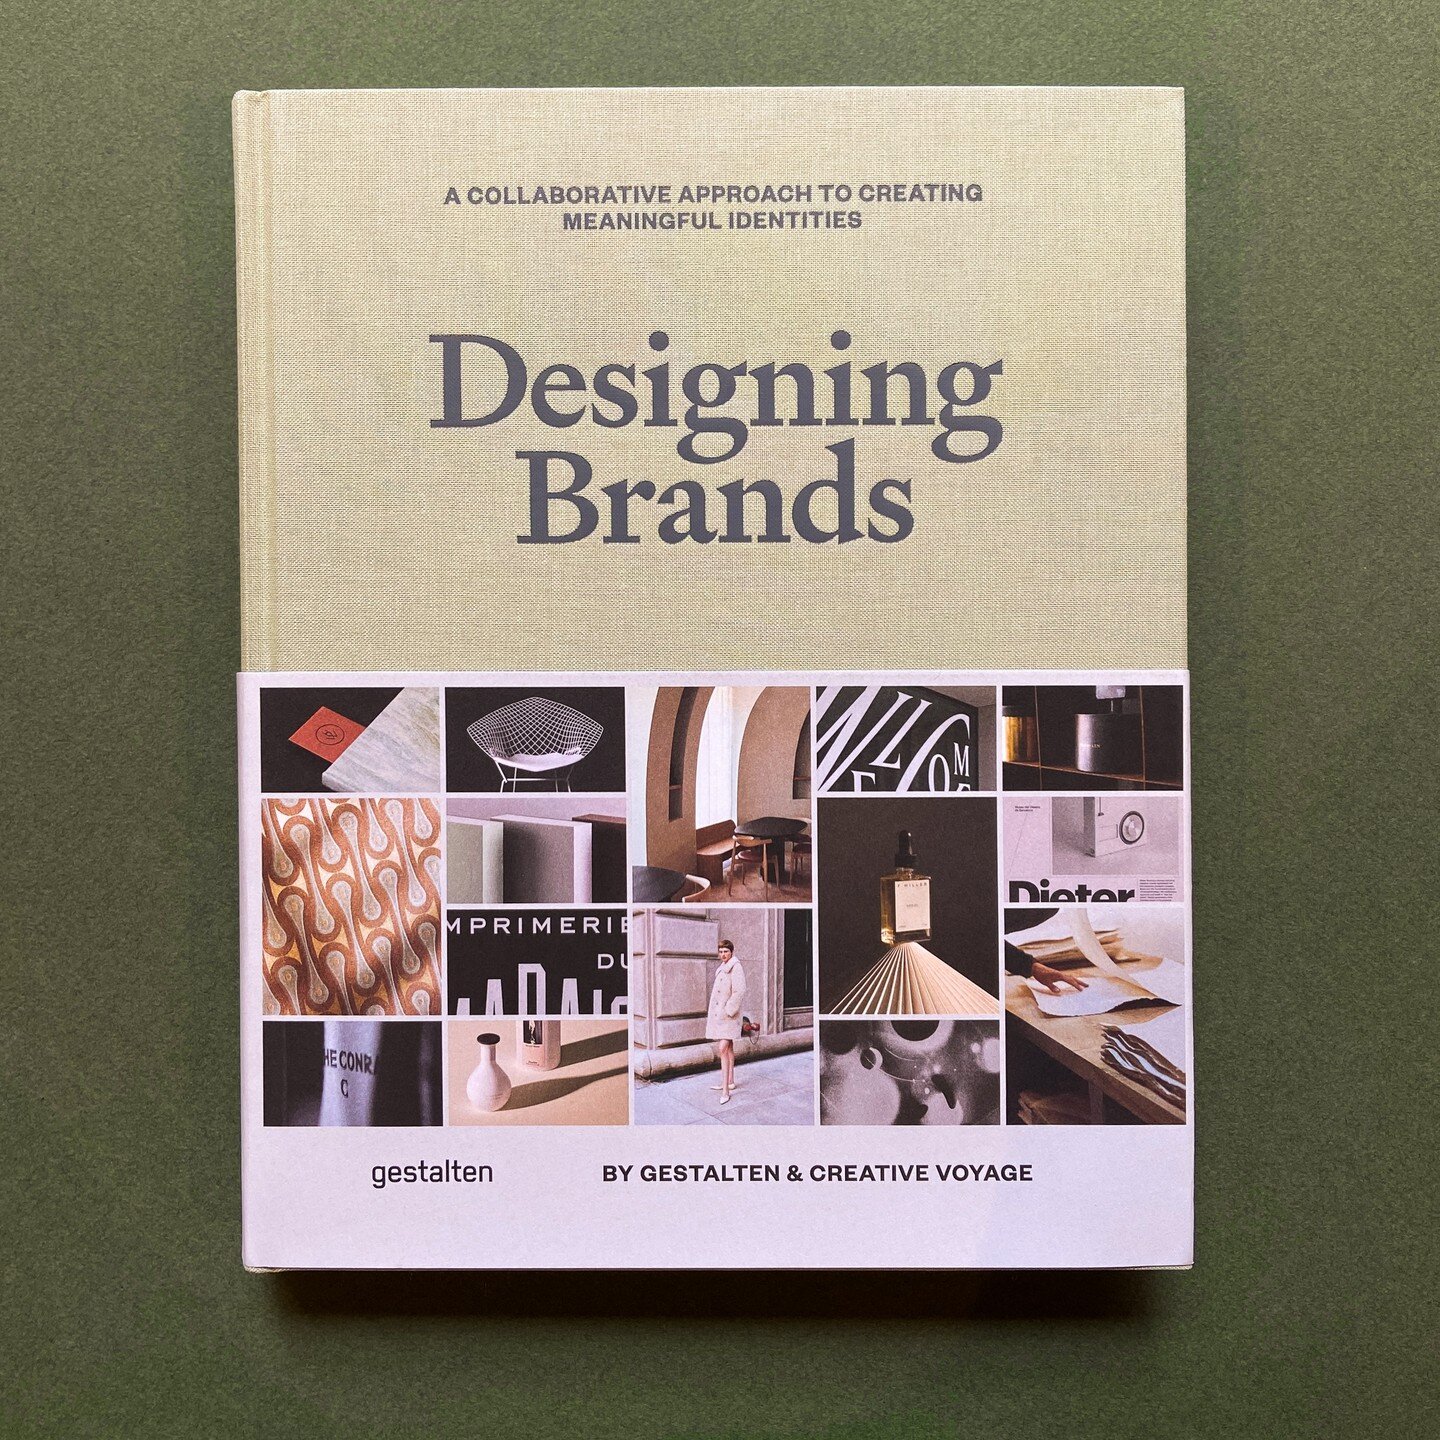 In Designing Brands, the Creative Voyage team provides a backstage view into eight studios who produce some of the world&rsquo;s most captivating visual identities. Alongside these independent agencies&rsquo; greatest projects, the book features in-d